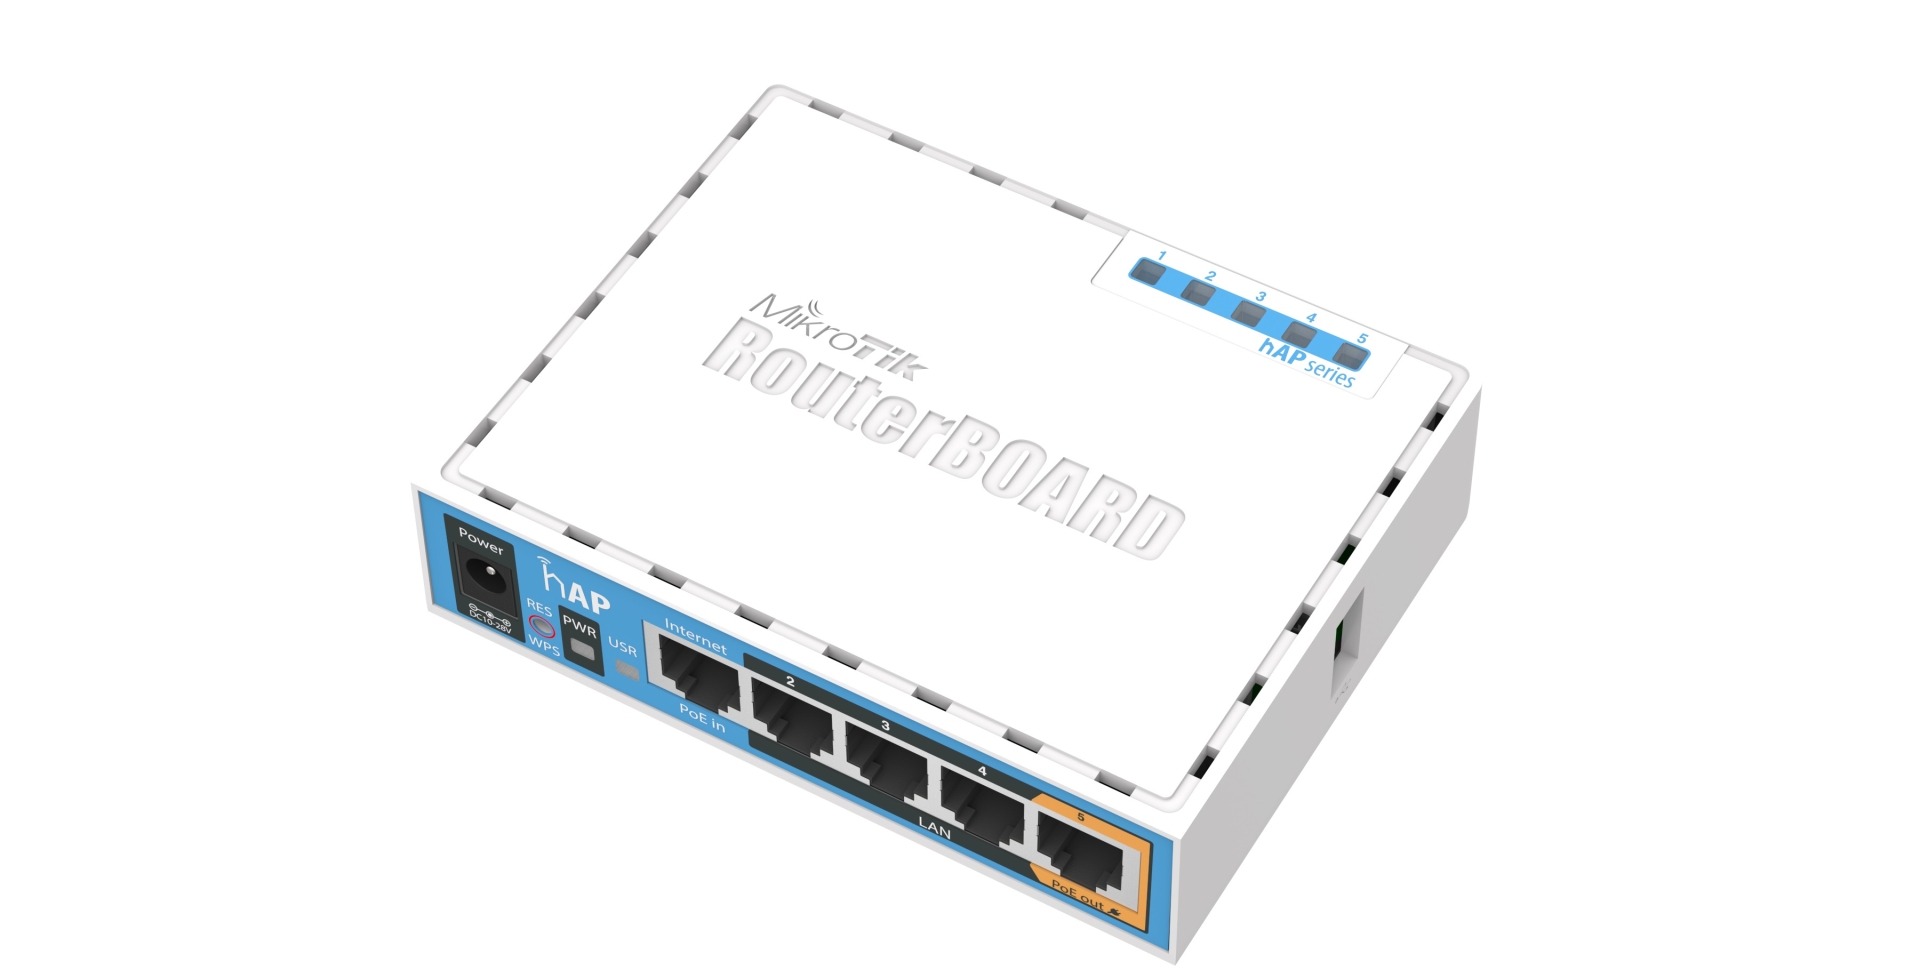 MIKROTIK RouterBOARD hAP (RB951Ui-2nD) (License Level 4) - The source ...